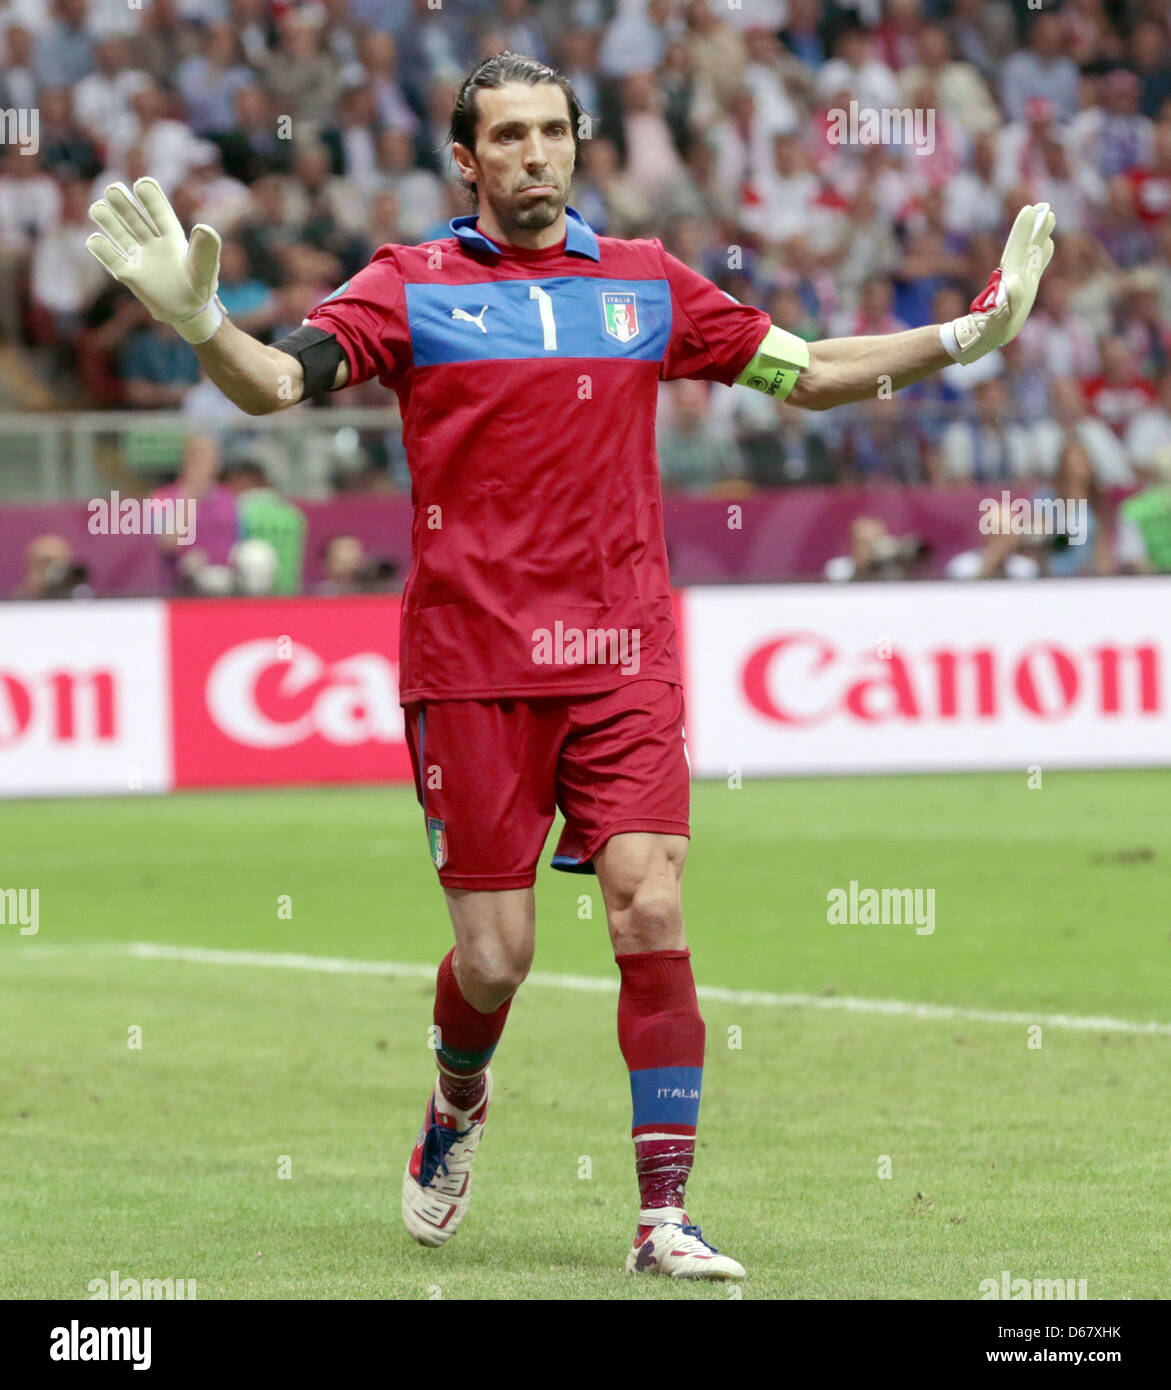 Italy's goalkeeper Gianluigi Buffon reacts during the UEFA EURO 2012 semi-final soccer match Germany vs. Italy at the National Stadium in Warsaw, Poland, 28 June 2012. Photo: Jens Wolf dpa (Please refer to chapters 7 and 8 of http://dpaq.de/Ziovh for UEFA Euro 2012 Terms & Conditions) Stock Photo